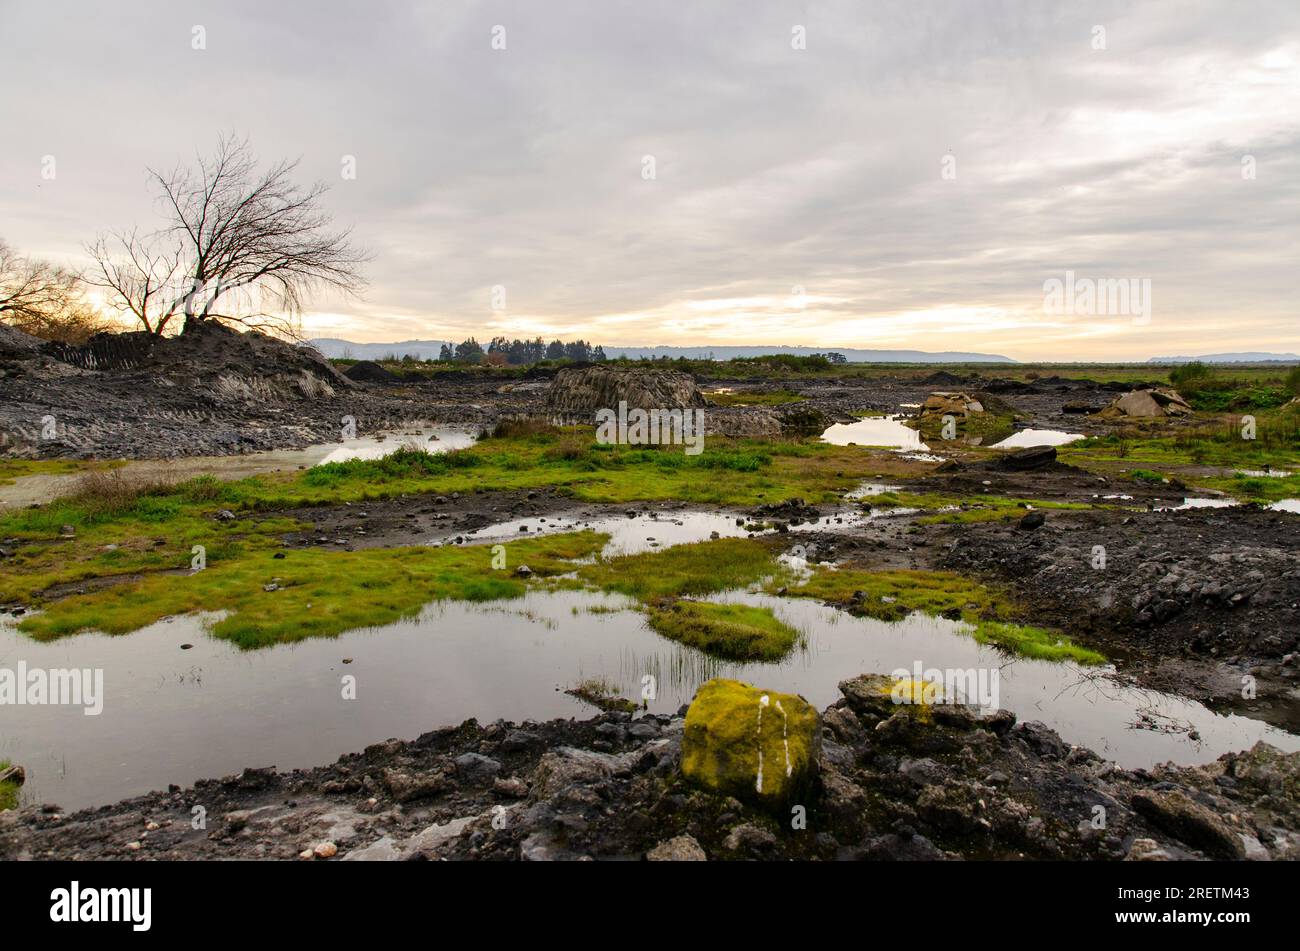 Industrial waste (scoria) from the Huachipato iron industry deposited in the Rocuant wetland in Talcahuano Stock Photo